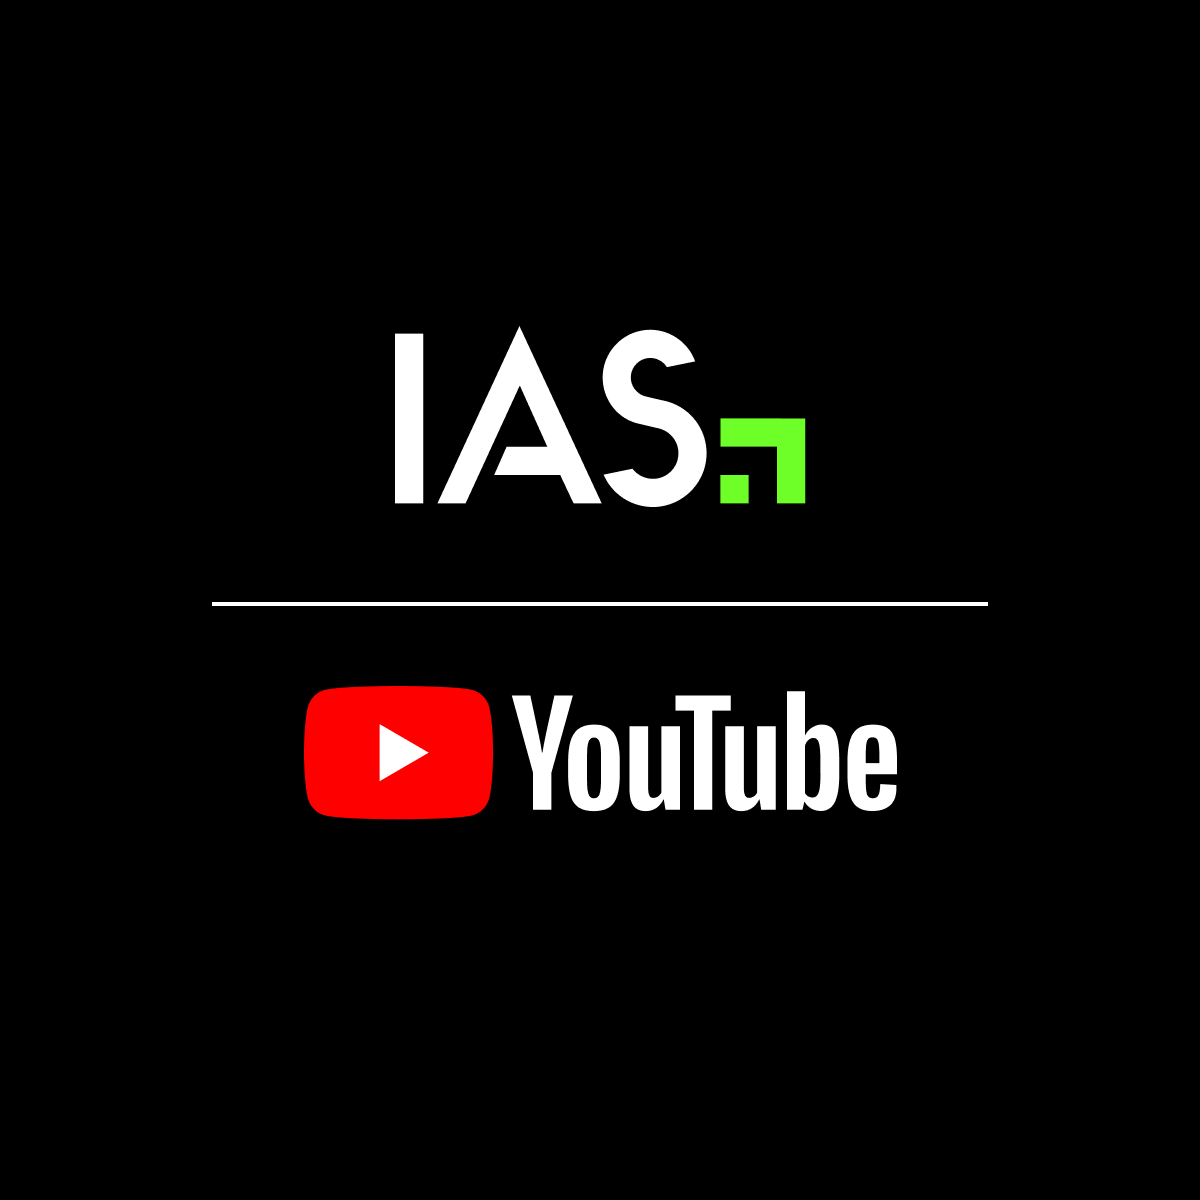 Integral Ad Science offers new measurement products for YouTube Shorts.